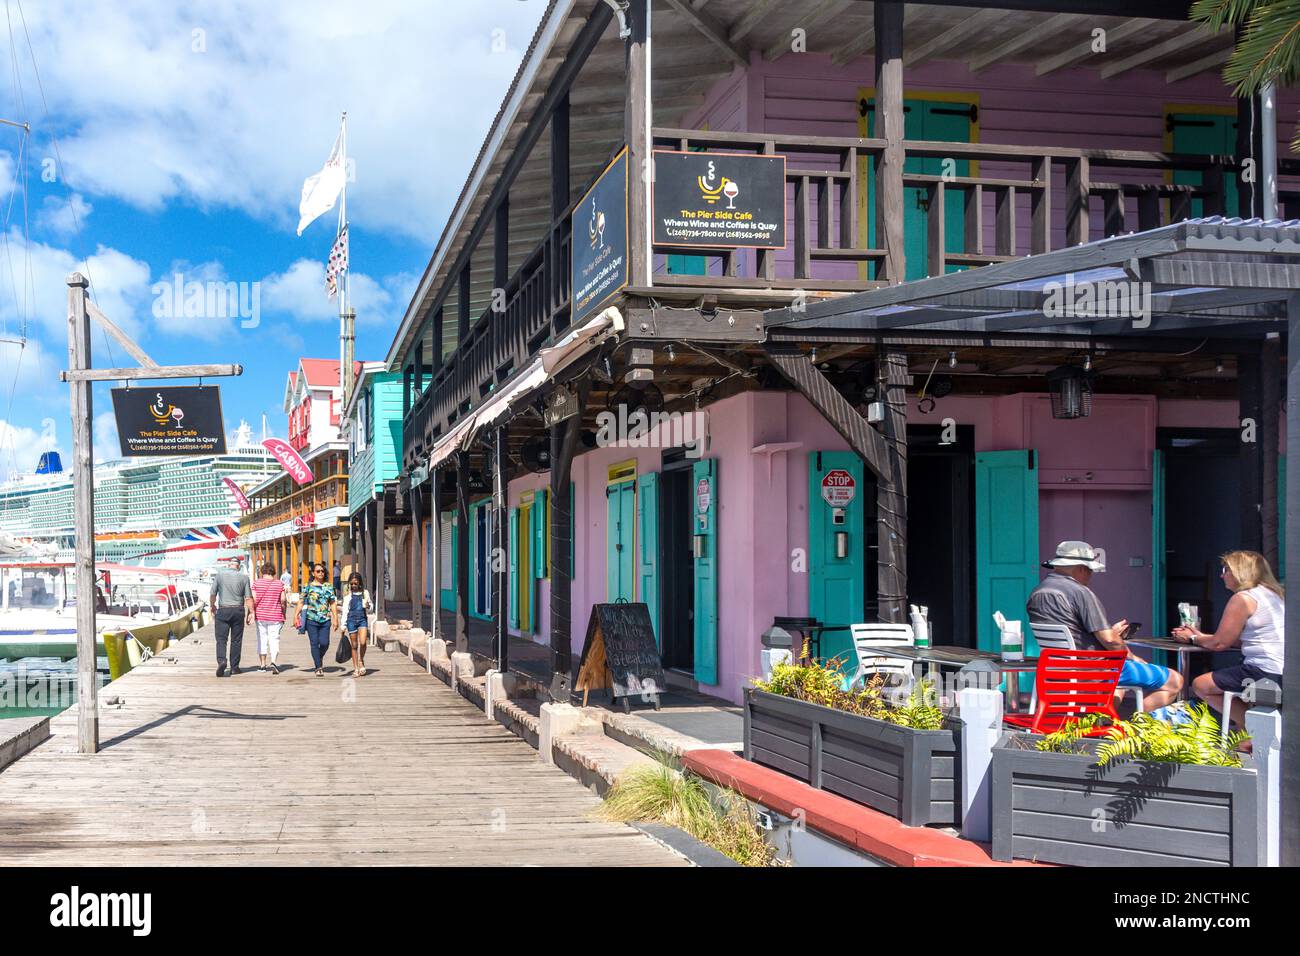 The Pier Side Cafe and boardwalk, Historic Redcliffe Quay, St John's, Antigua, Antigua and Barbuda, Lesser Antilles, Caribbean, Caribbean Stock Photo